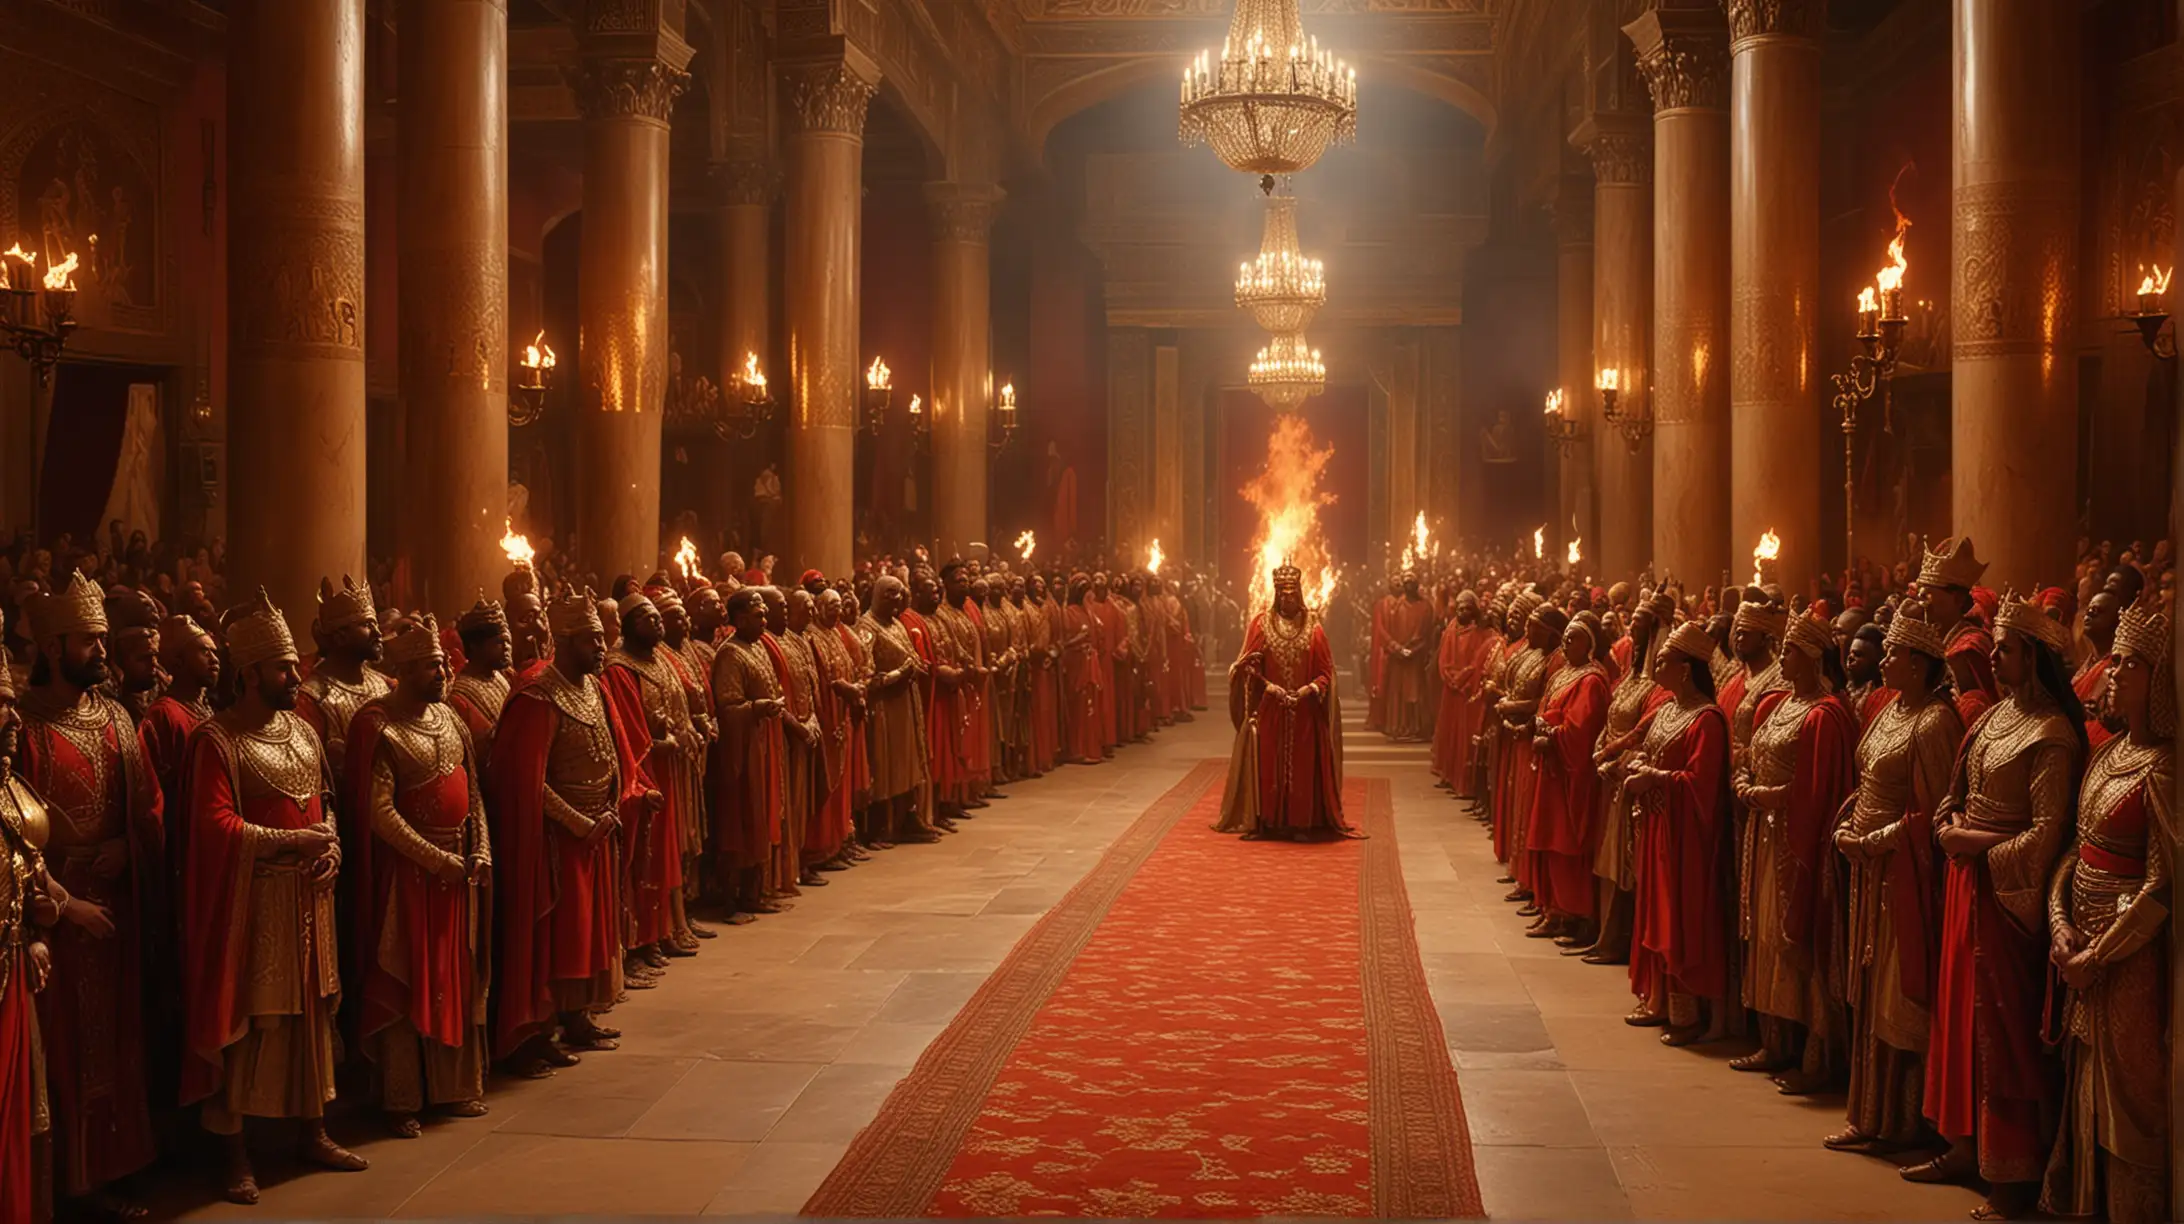 King Salomon and the queen of Sheba surrounded by the court,  on richly attired in red and gold, at a banque in the king palace, crowded seen, fire torch light, very realistic, panoramic view 